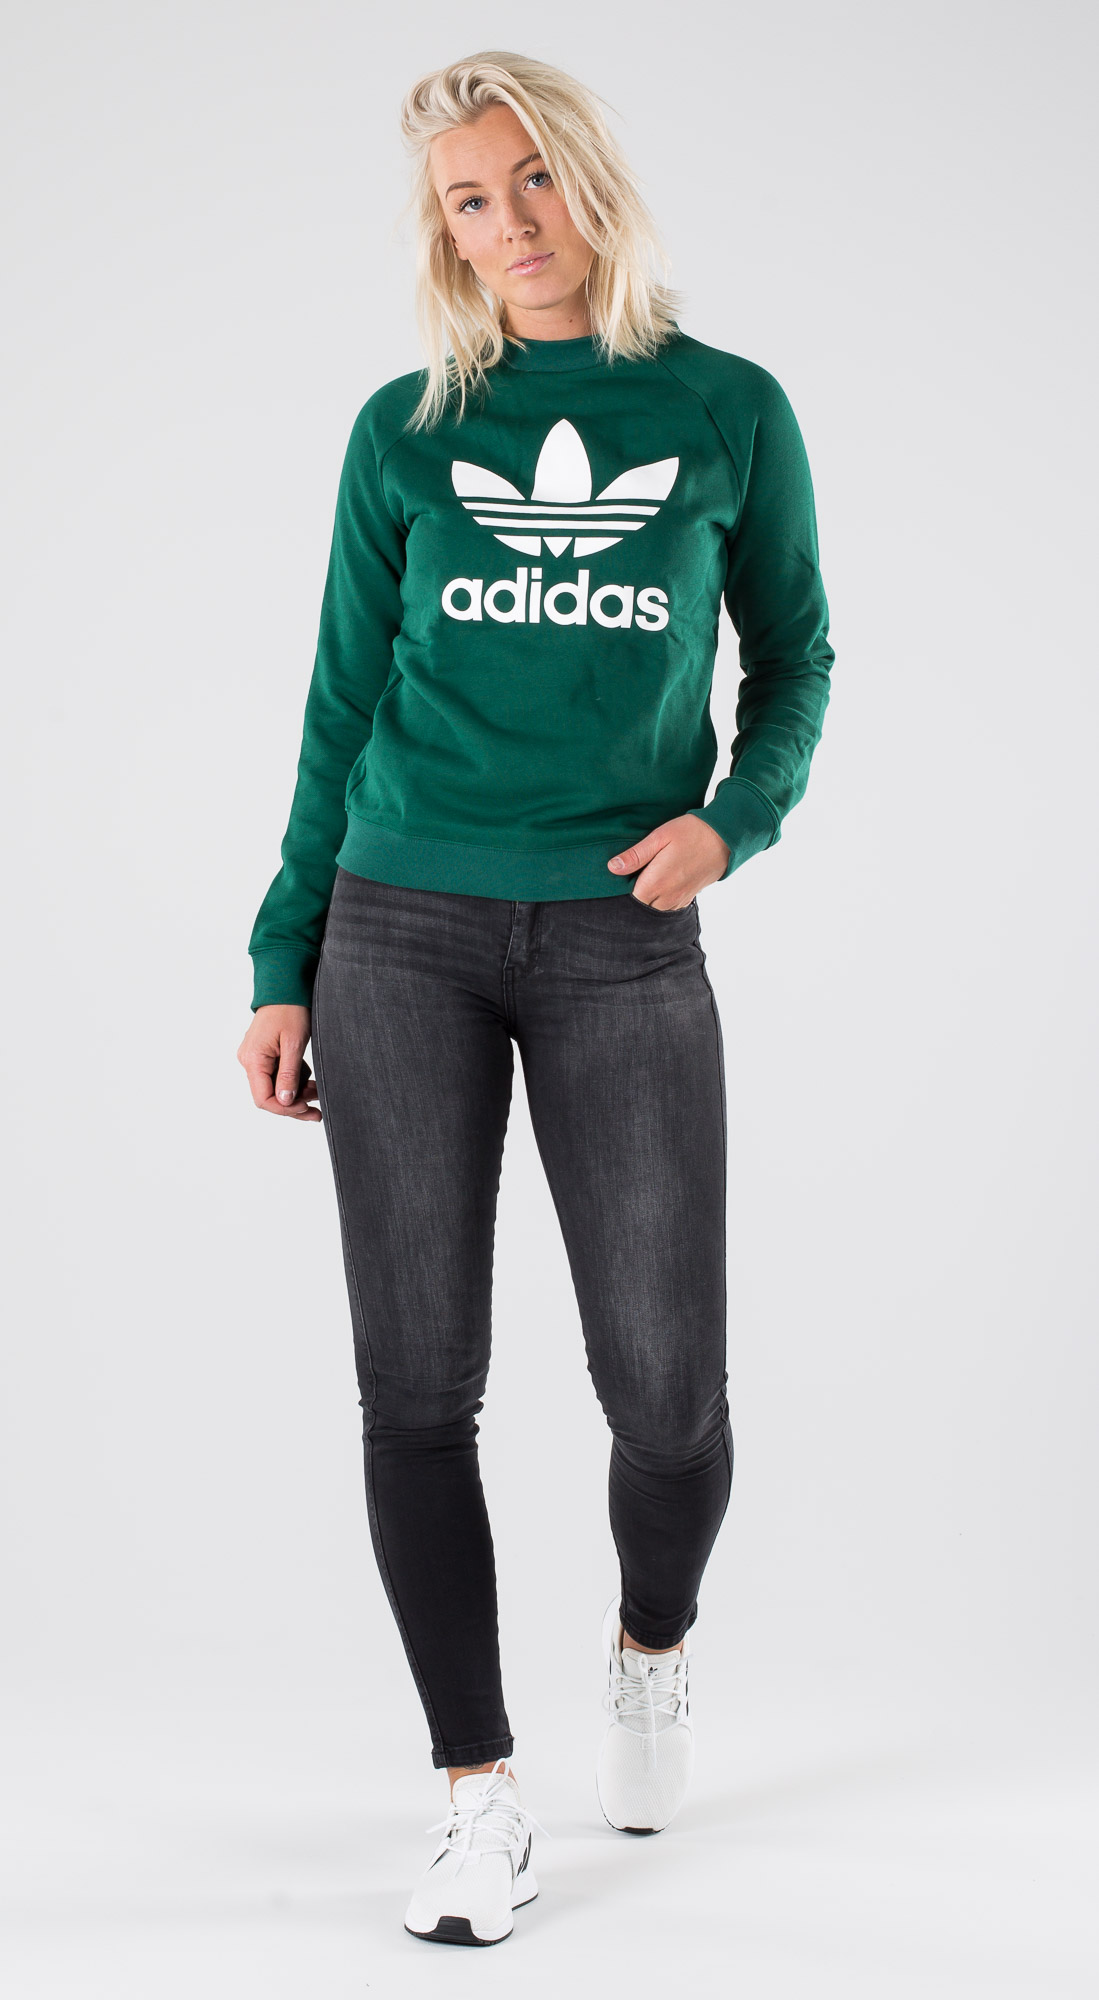 adidas green outfit